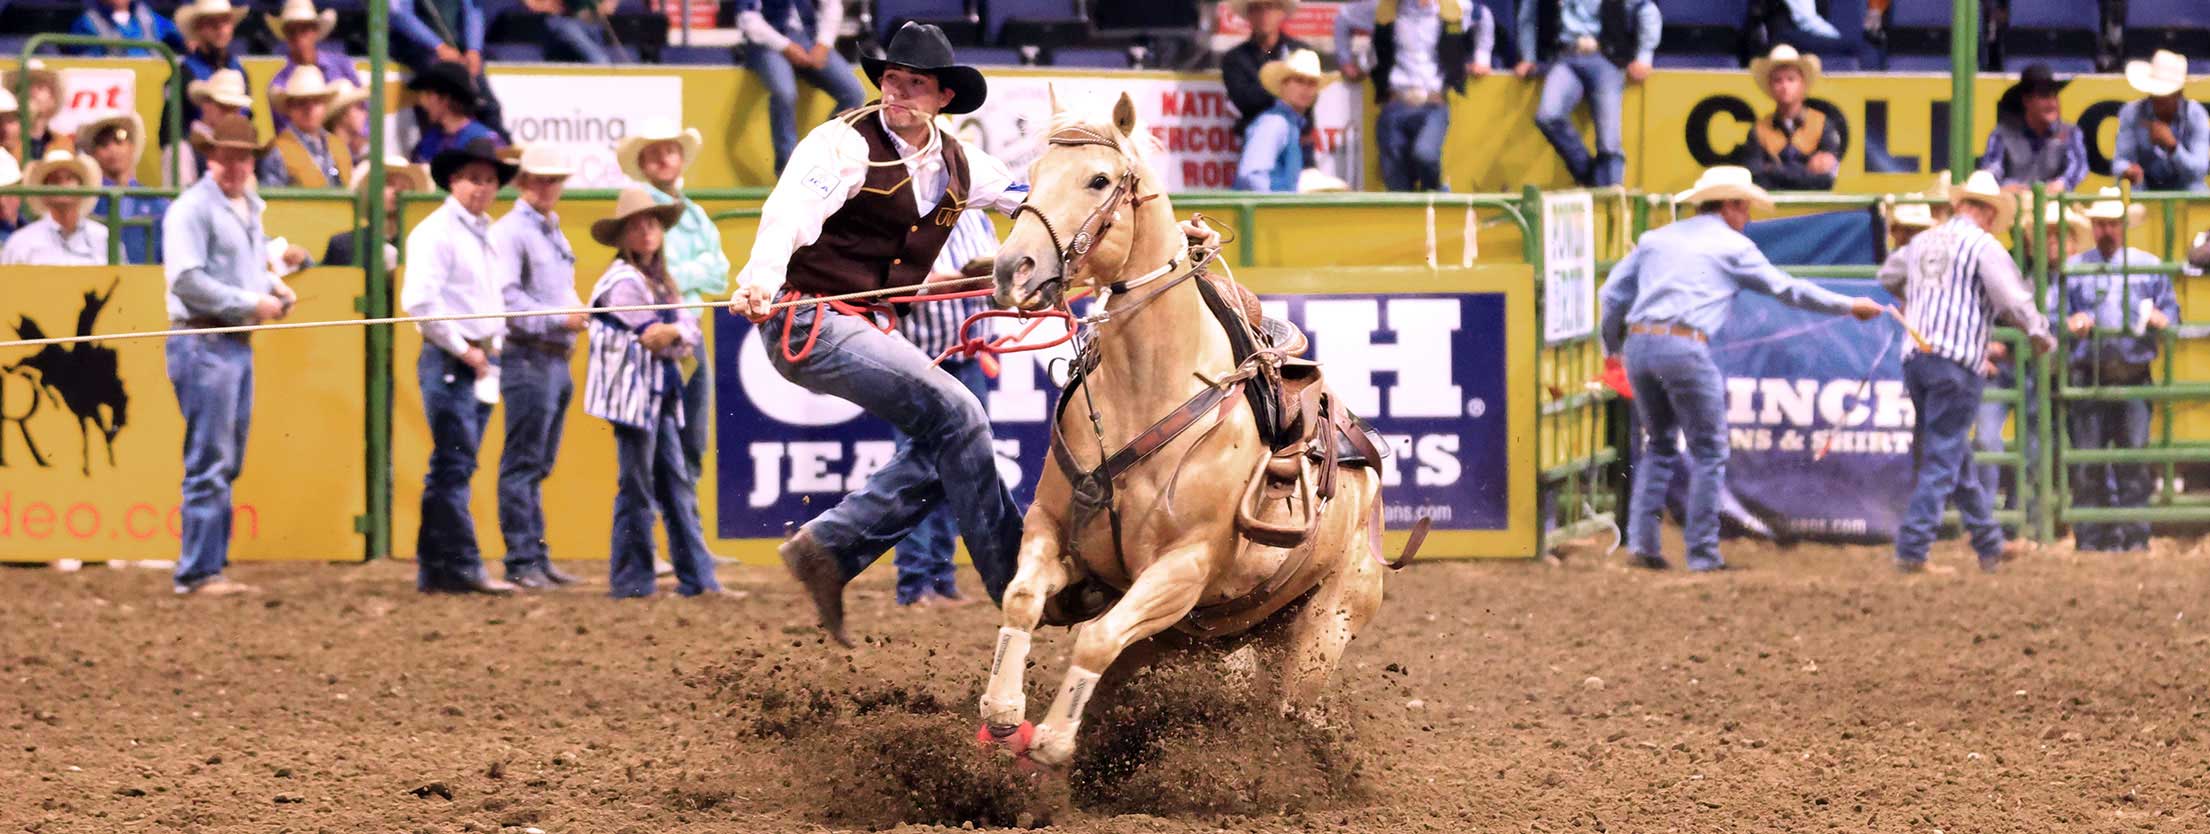 The World Needs More Cowboys with two people riding and roping